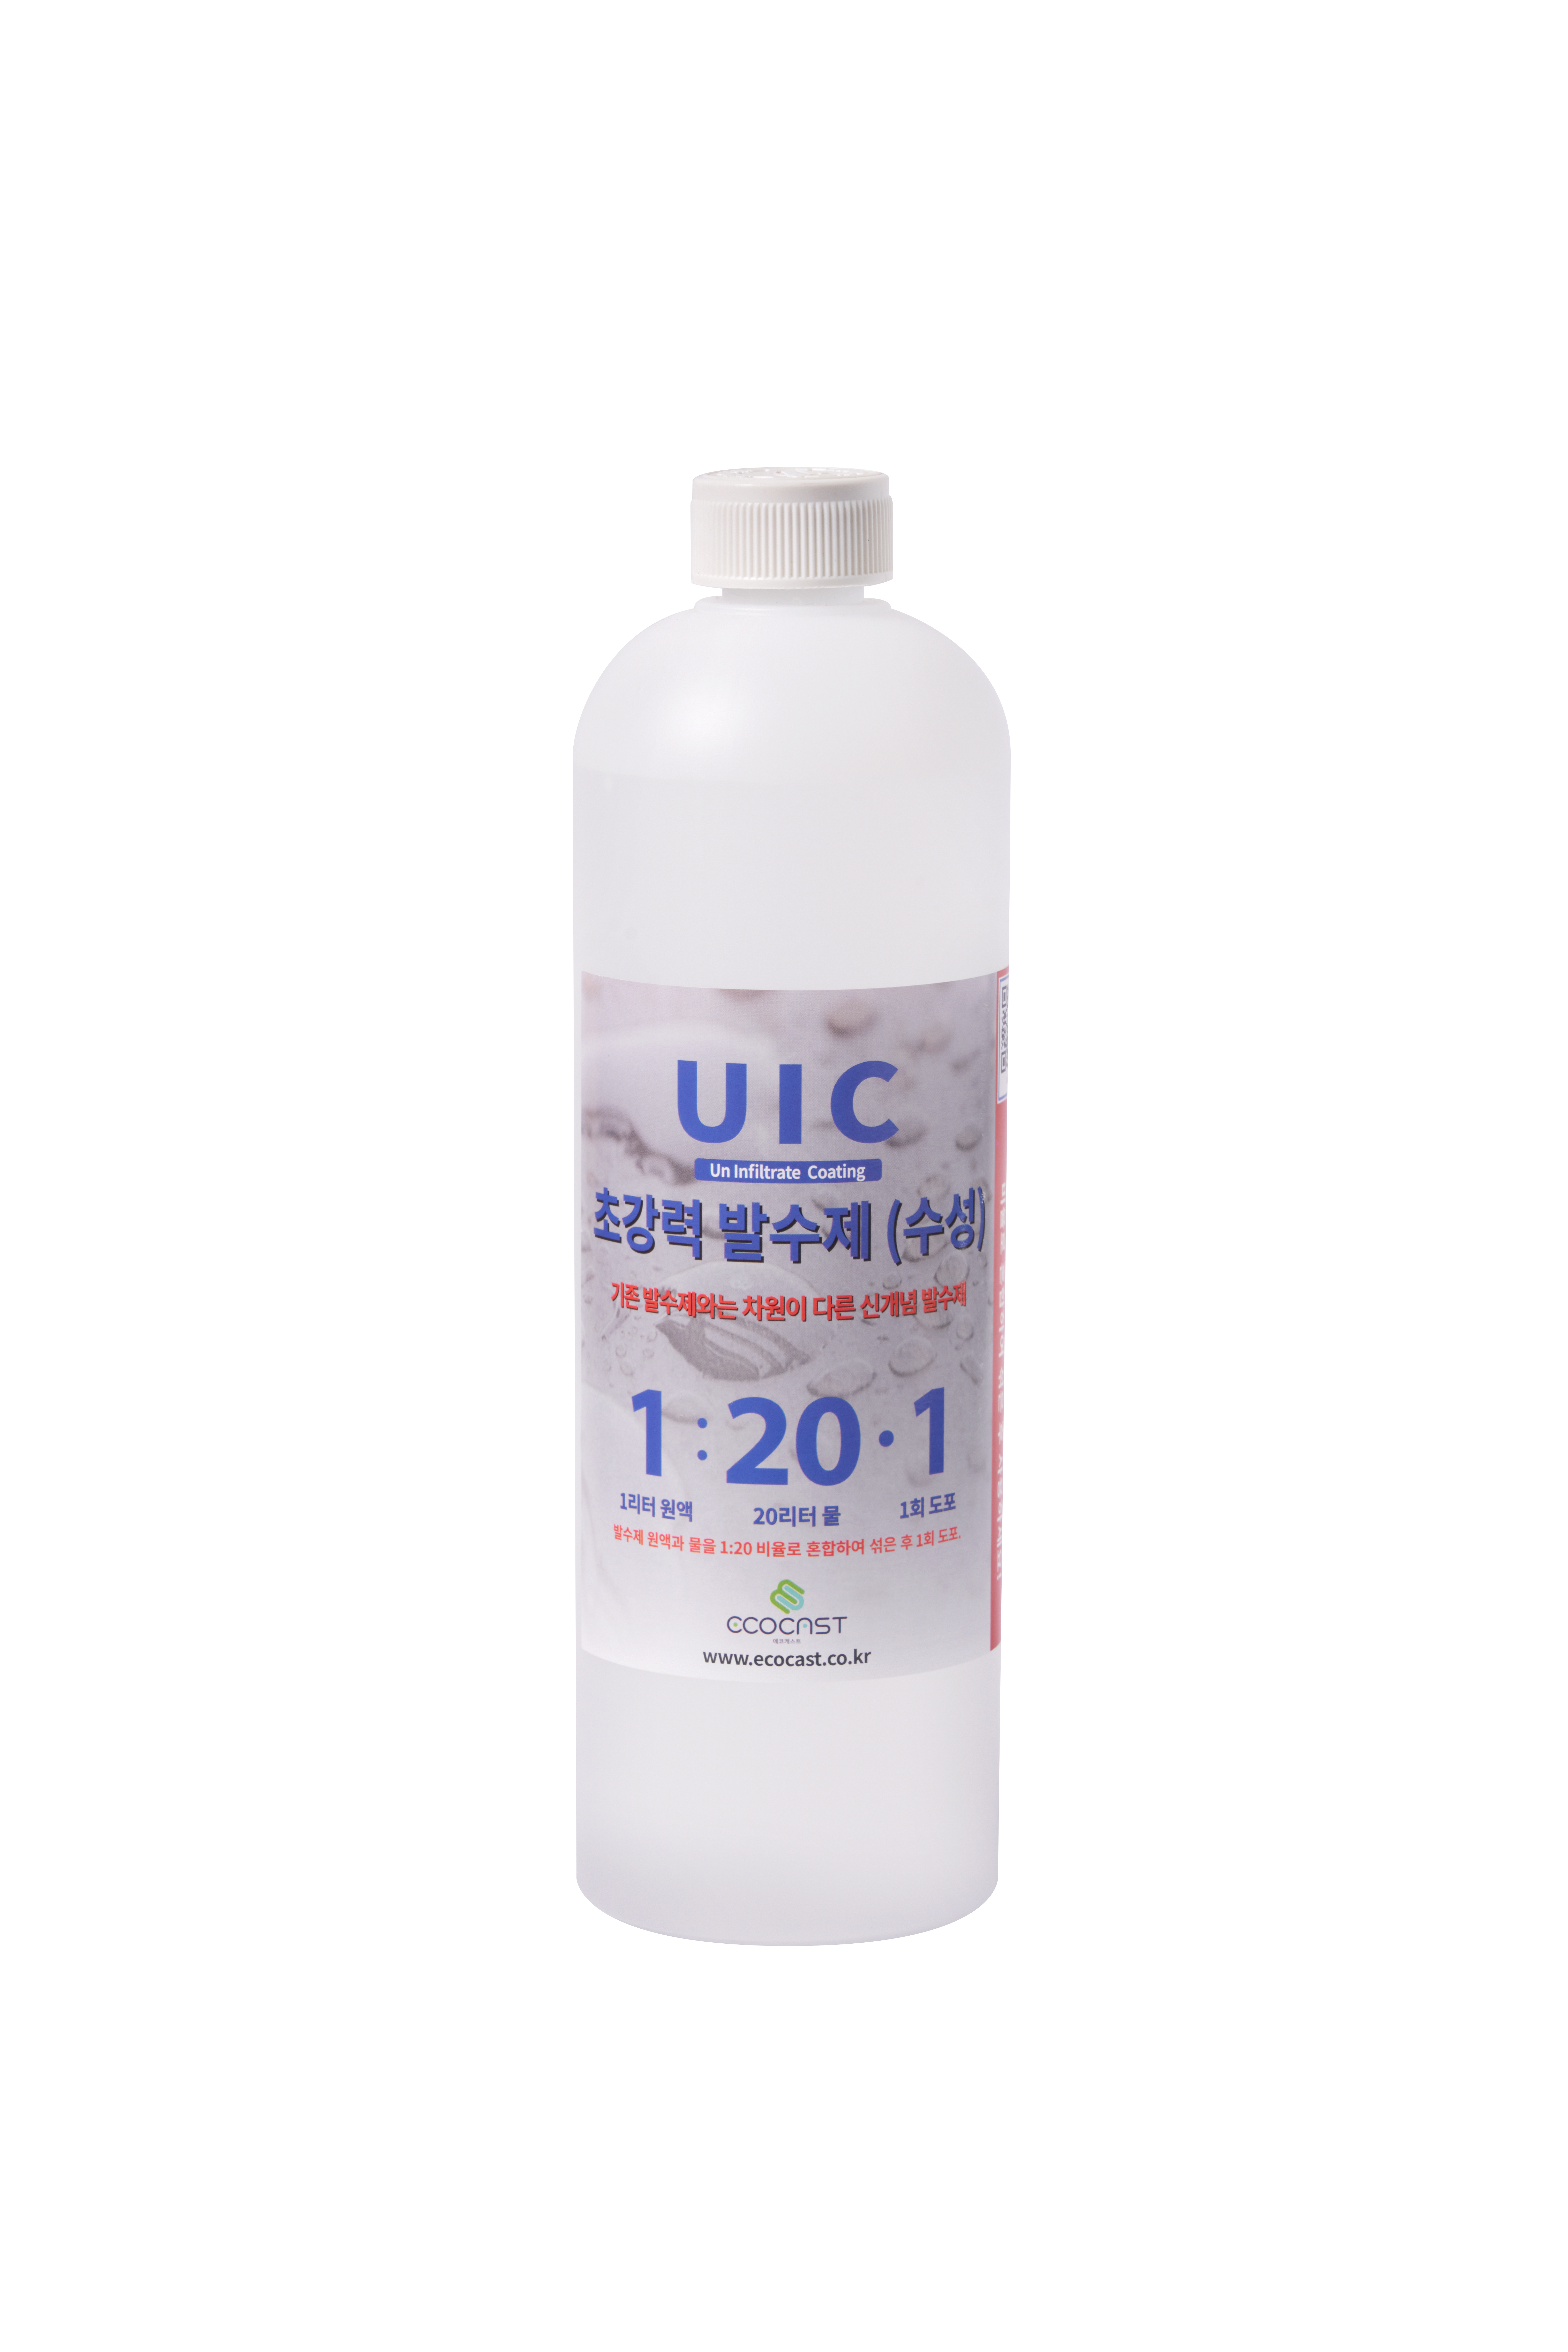 UIC exterior wall water repellent